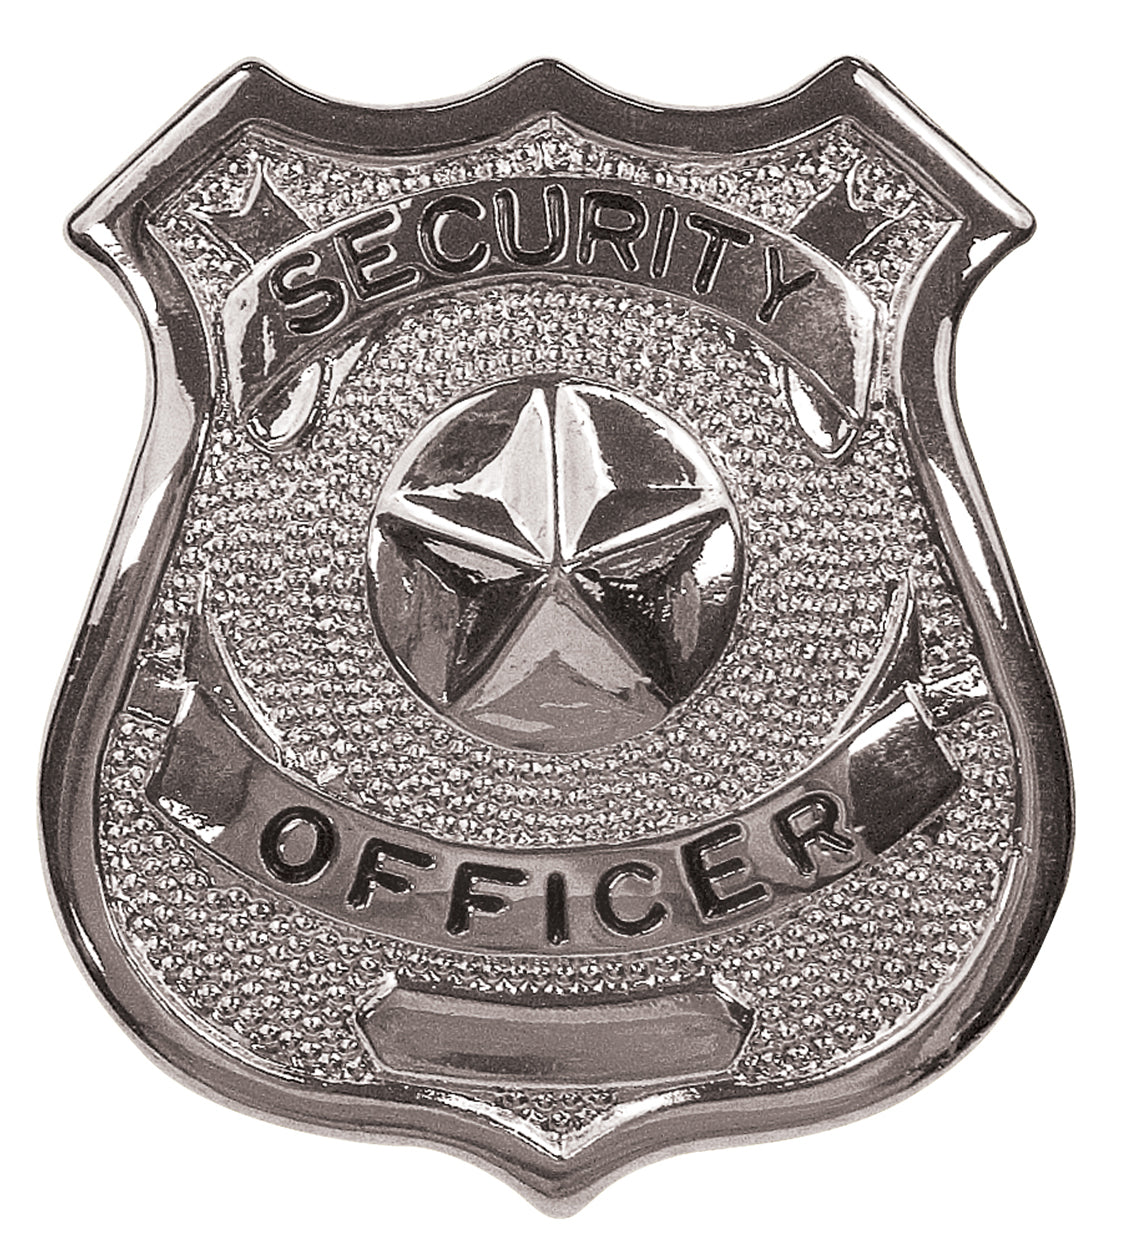 Security Officer Badge